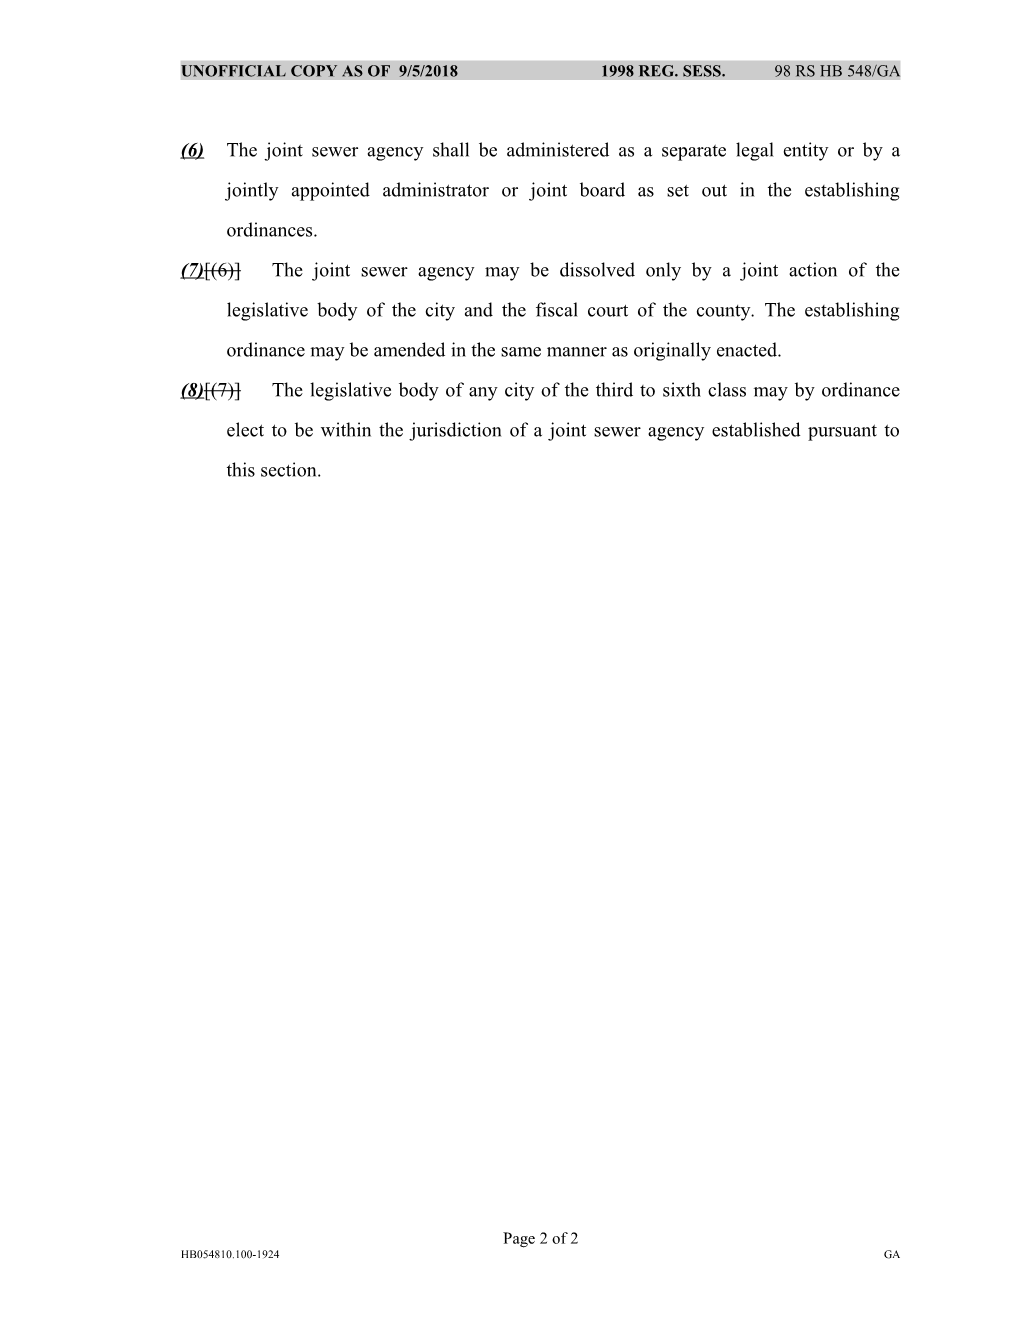 AN ACT Relating to Joint Sewer Agencies